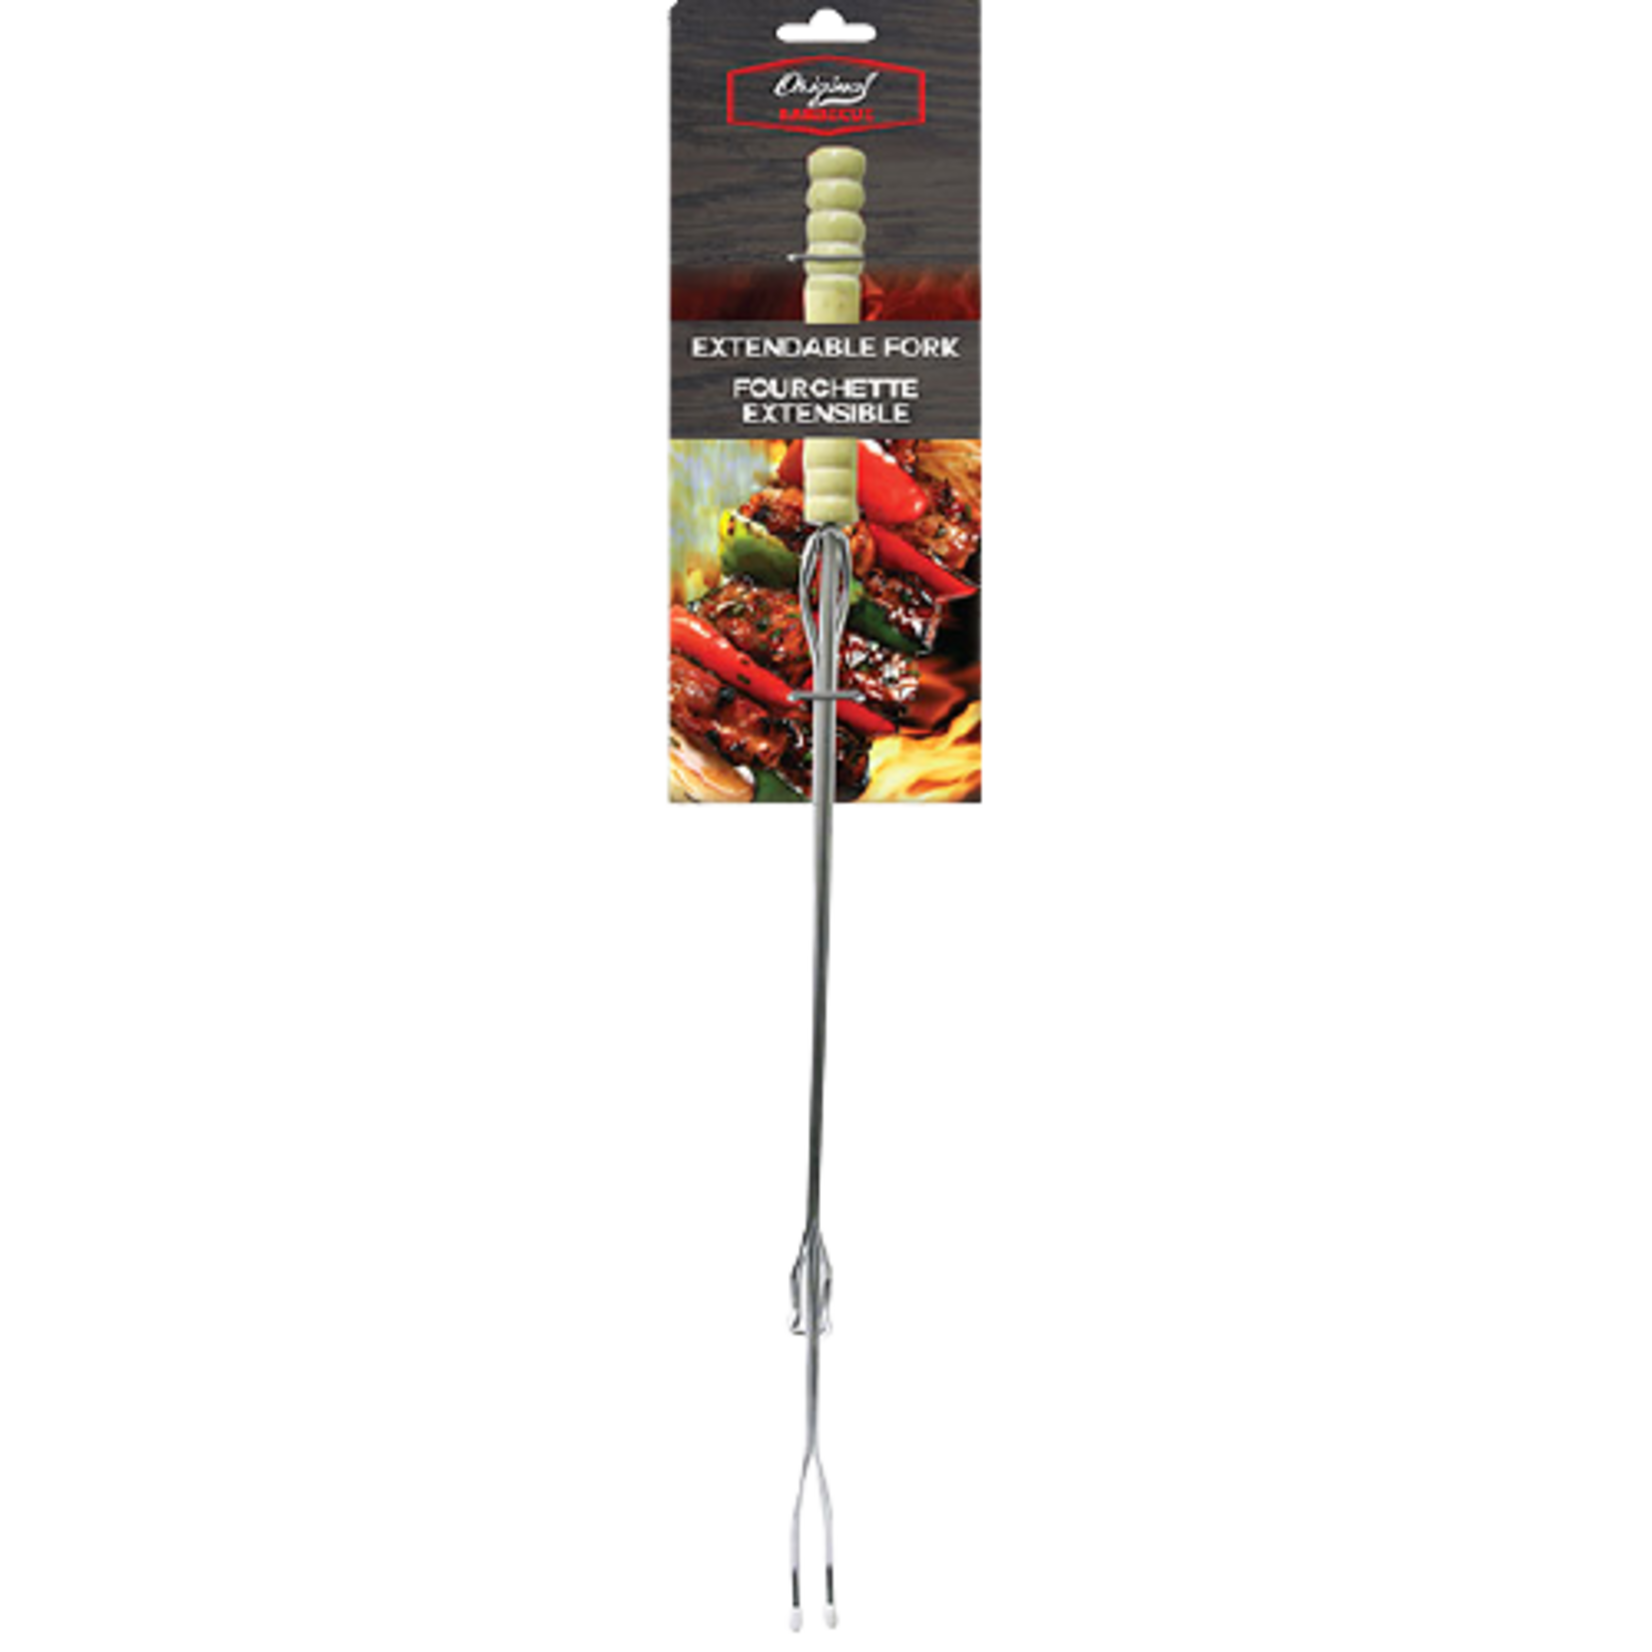 BBQ FORK EXTENDABLE WOODEN HANDLE